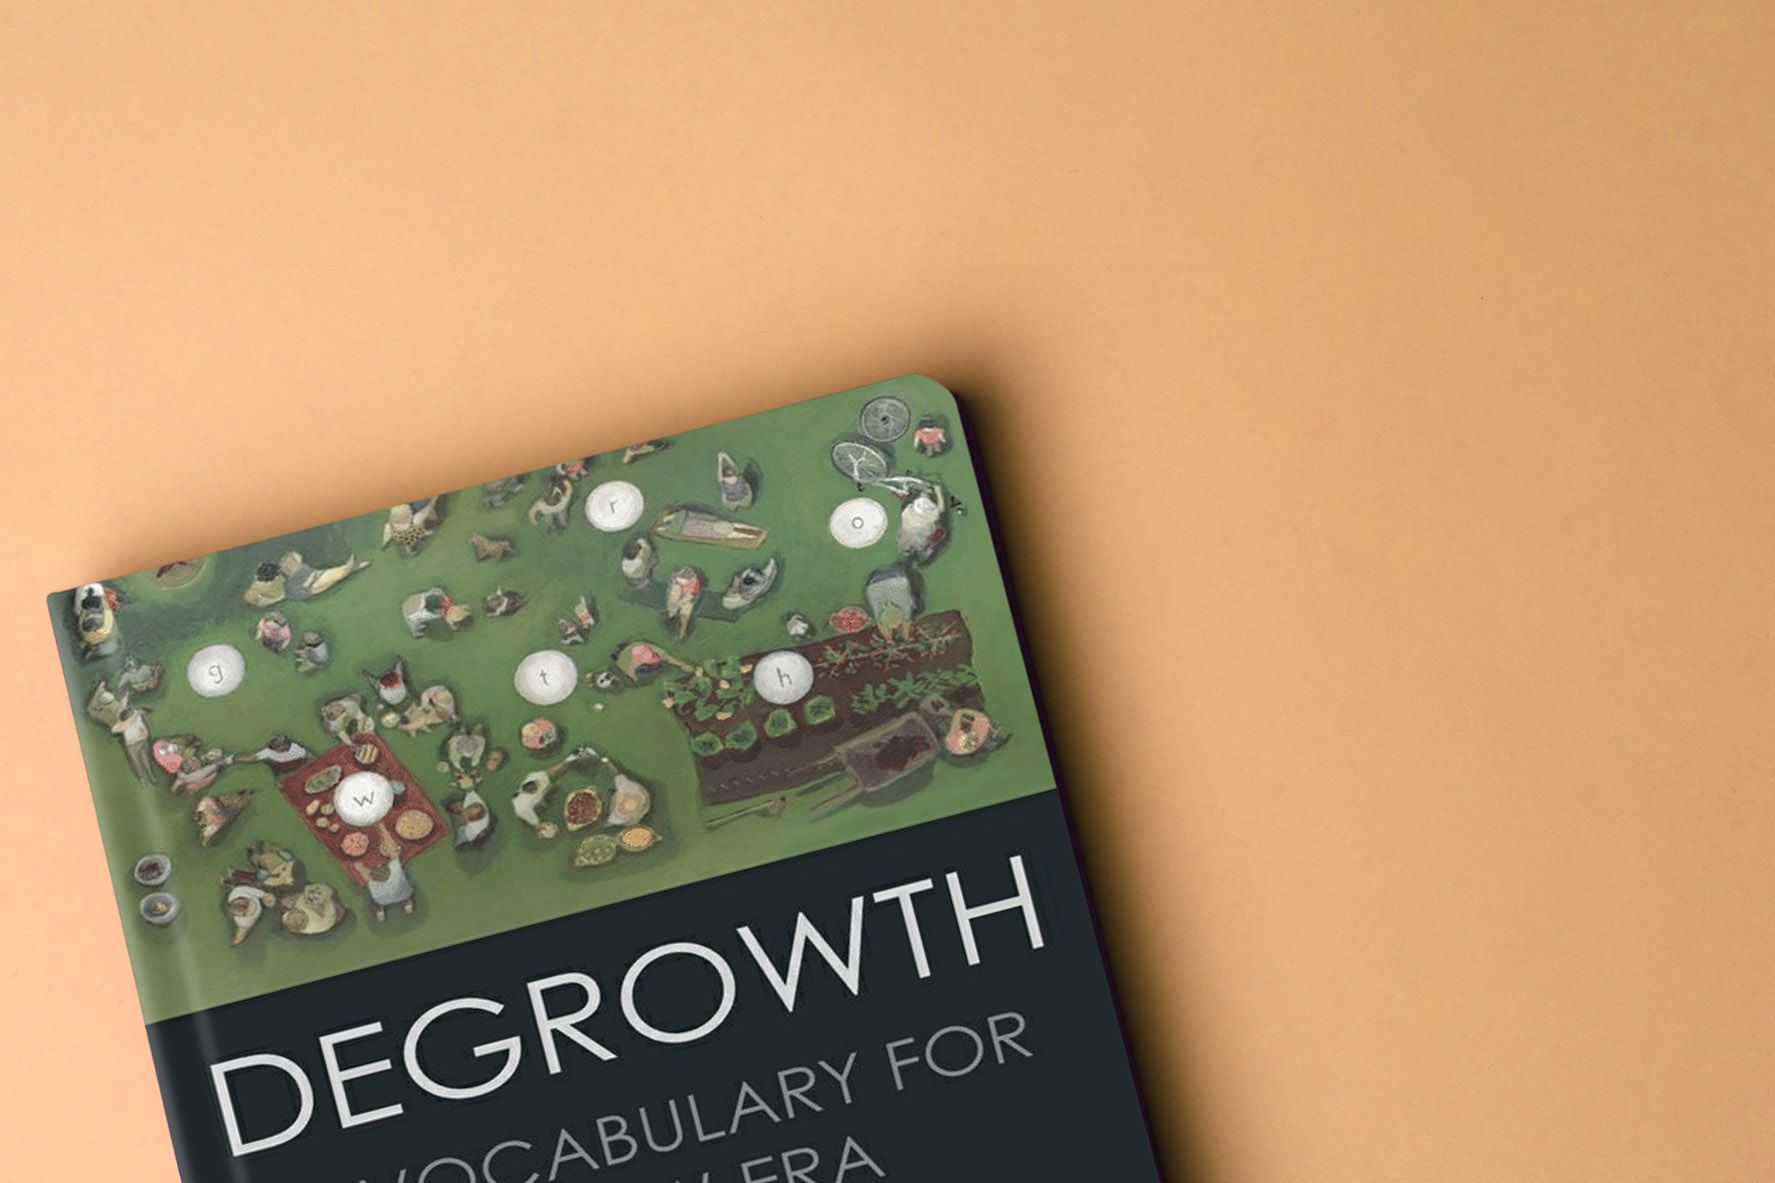 Dutch summary of the book "degrowth"